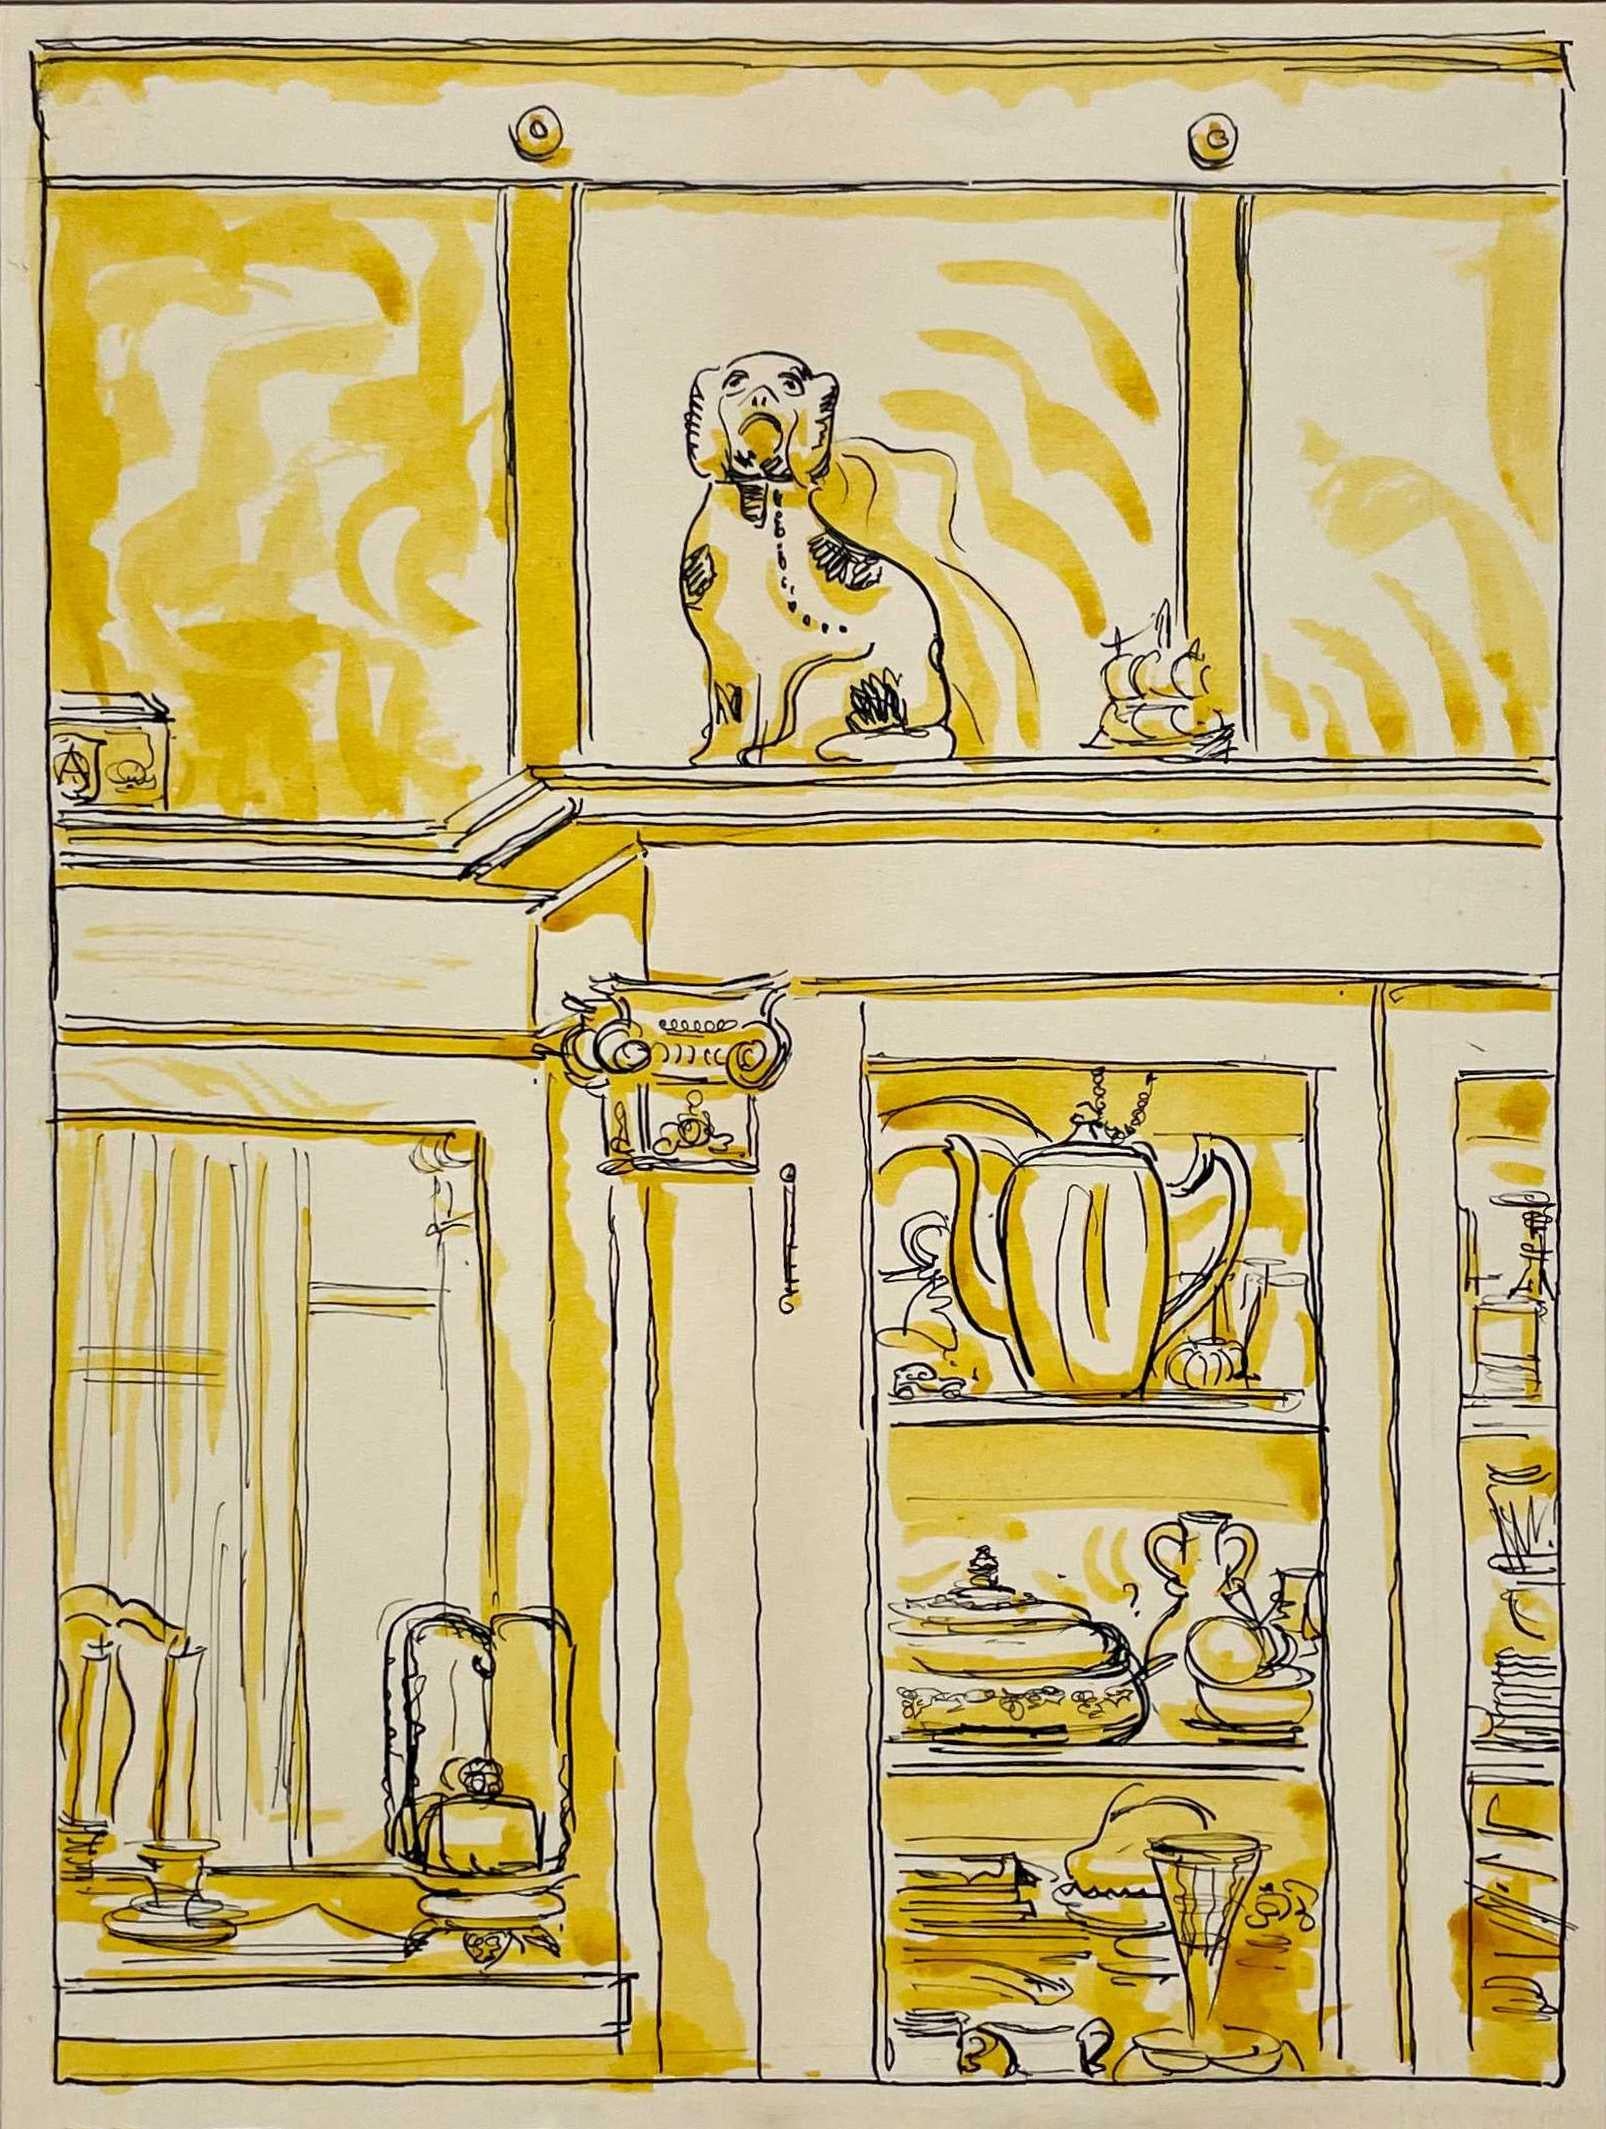 A ca. 1931 charming watercolor interior scene; a study in yellow by artist Harold Haydon.

Harold Emerson Haydon was born in Fort William, Ontario, Canada in 1909.   Haydon came to Chicago with his family in 1917 and became a naturalized American